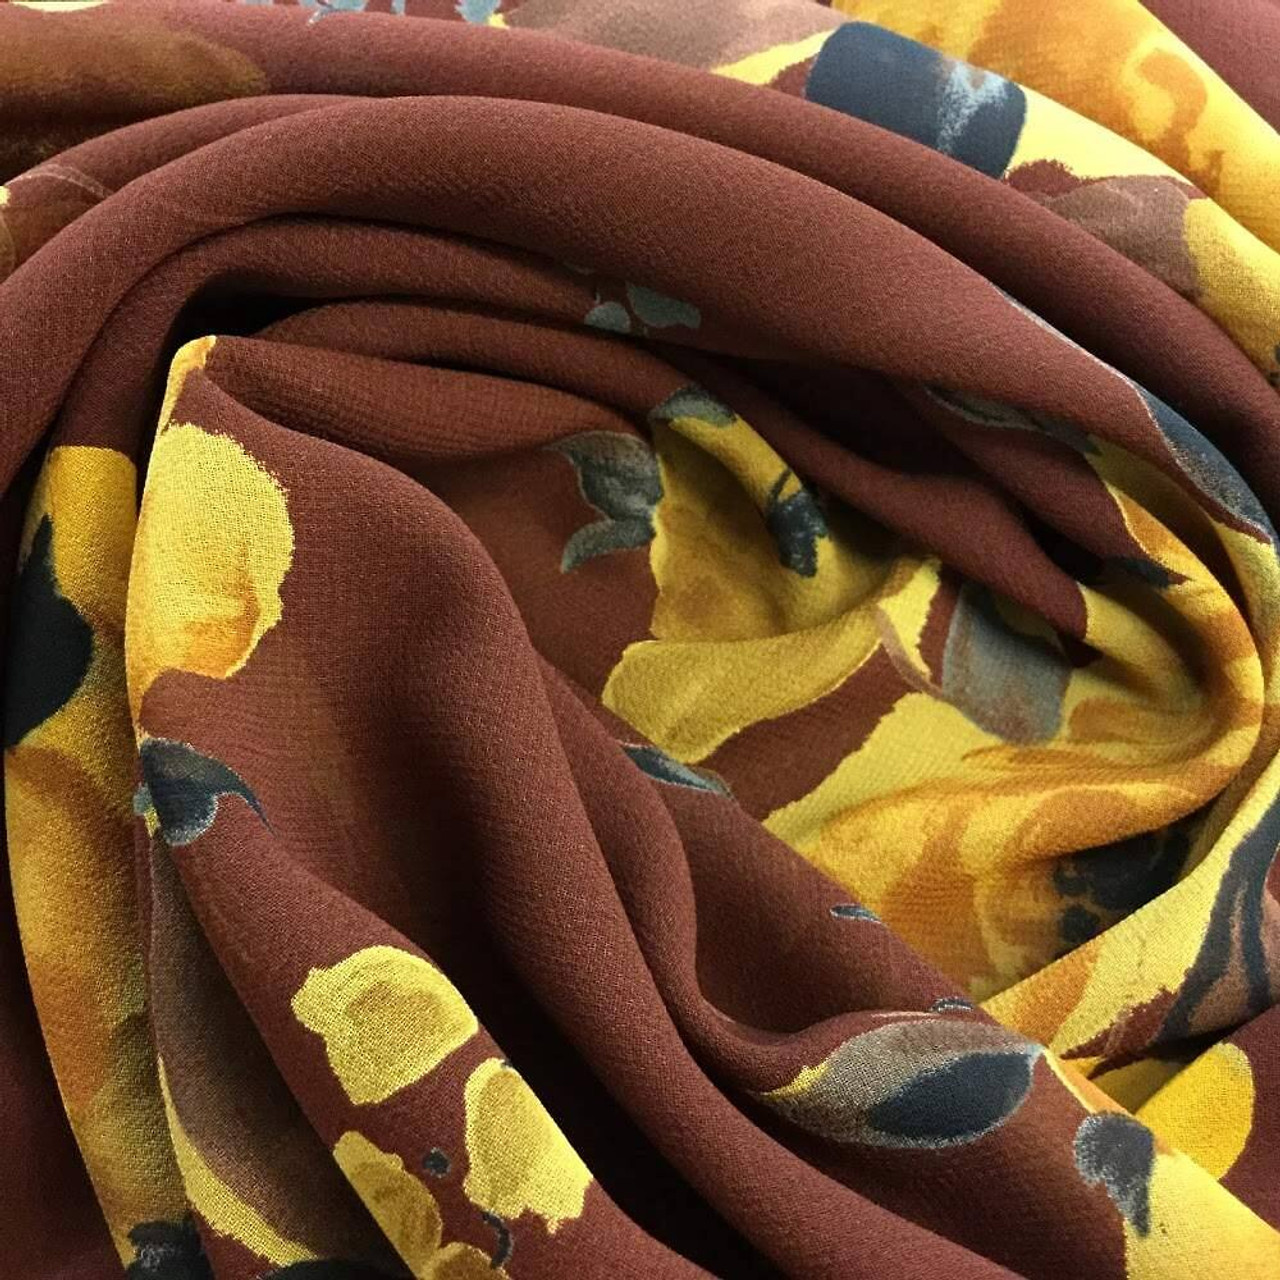 Double Sided Wool Silk Scarf in Burgundy, Blue, Mauve & Gold Yellow Paisley  with Geometric Pattern